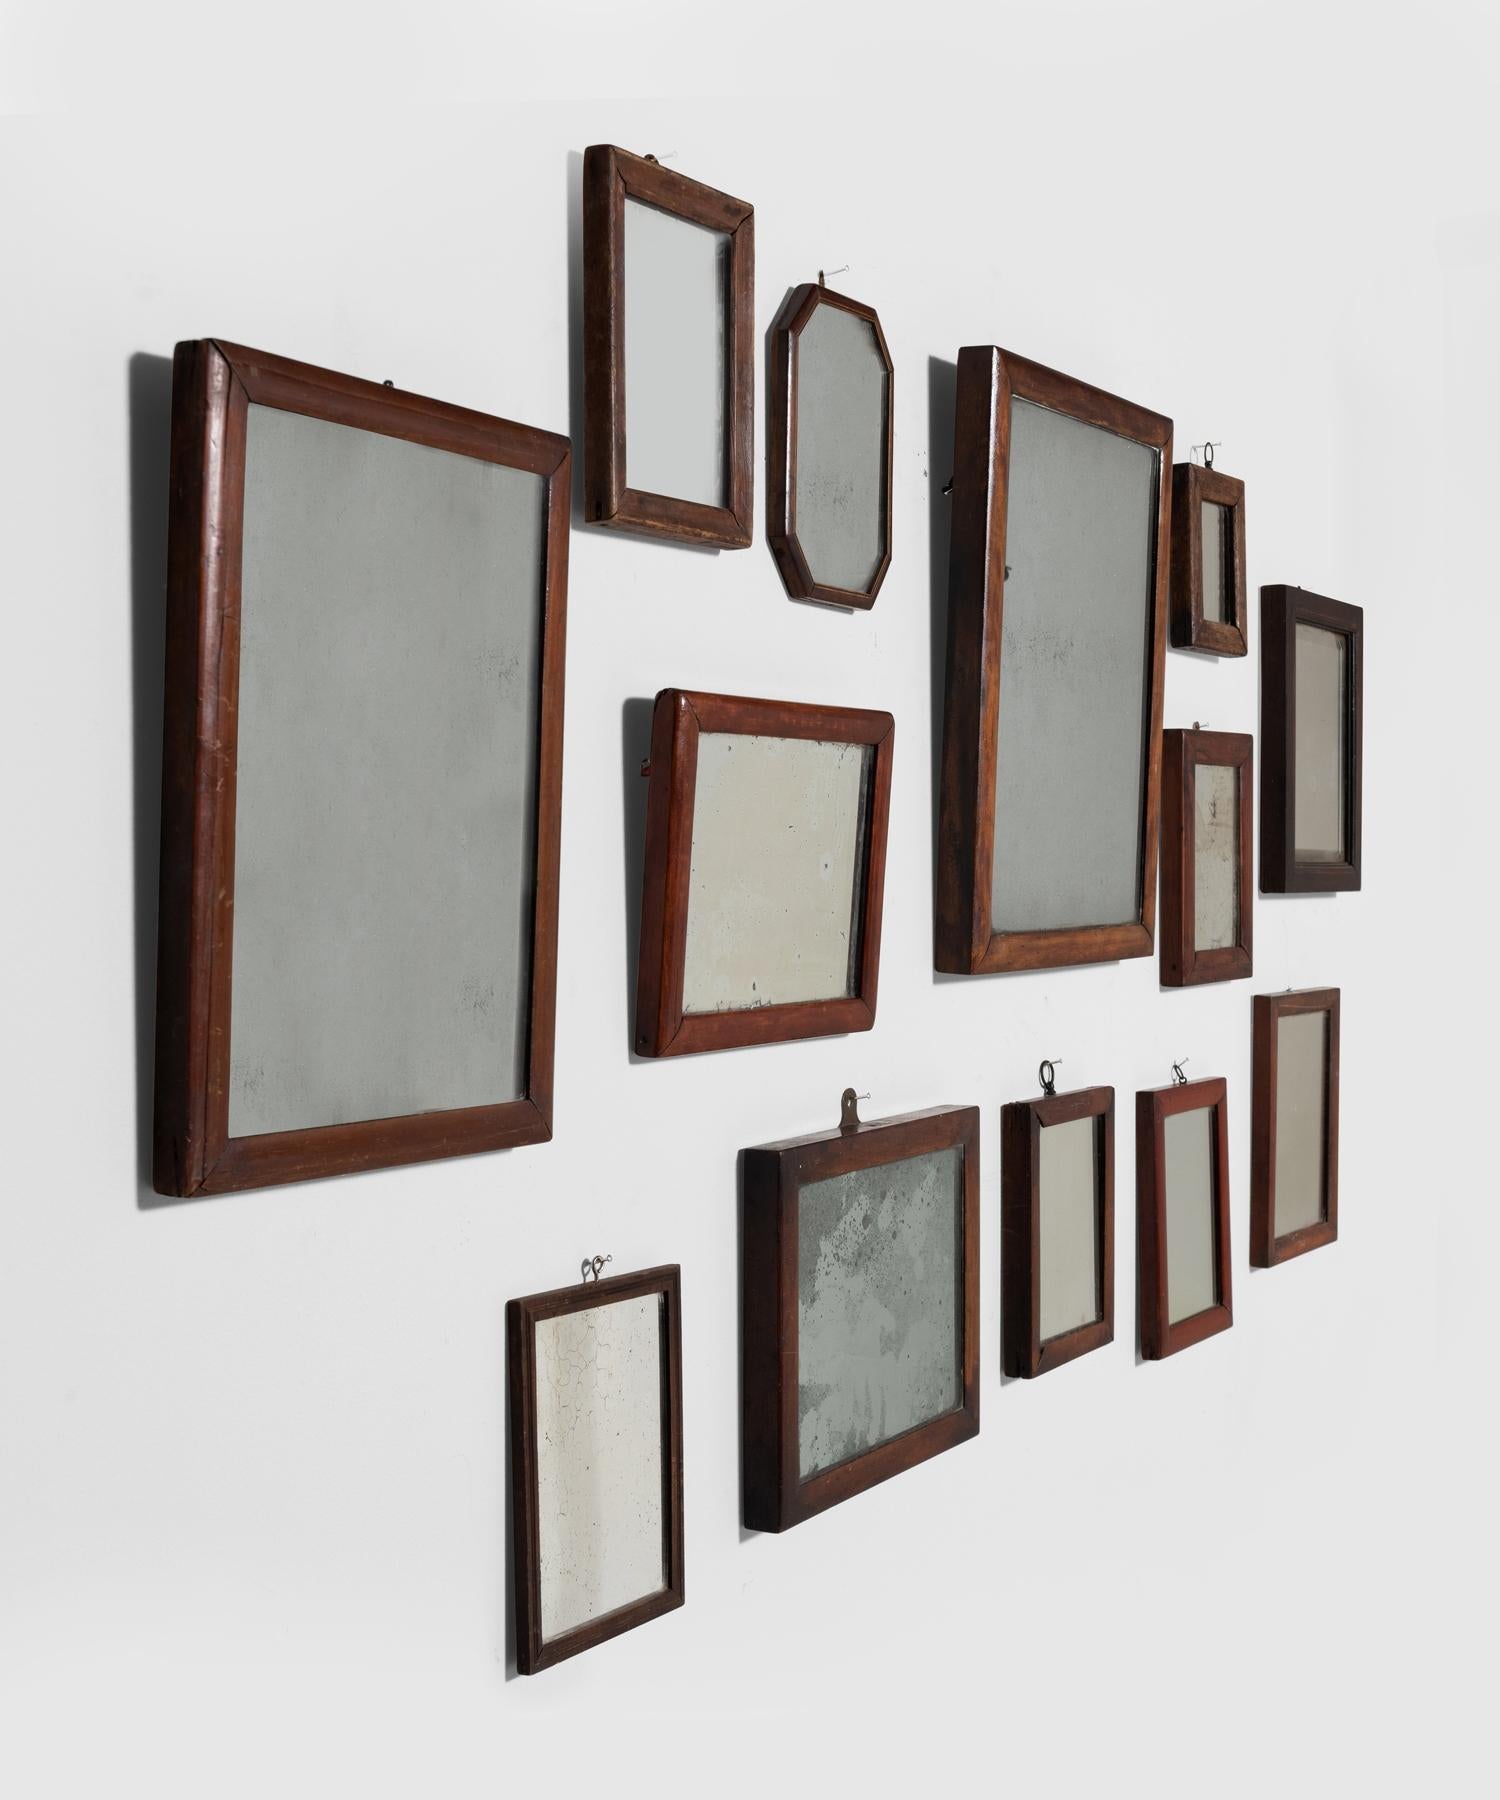 Unique wooden frames in various shapes and sizes, with original mercury glass plates.


Measures: 6.25